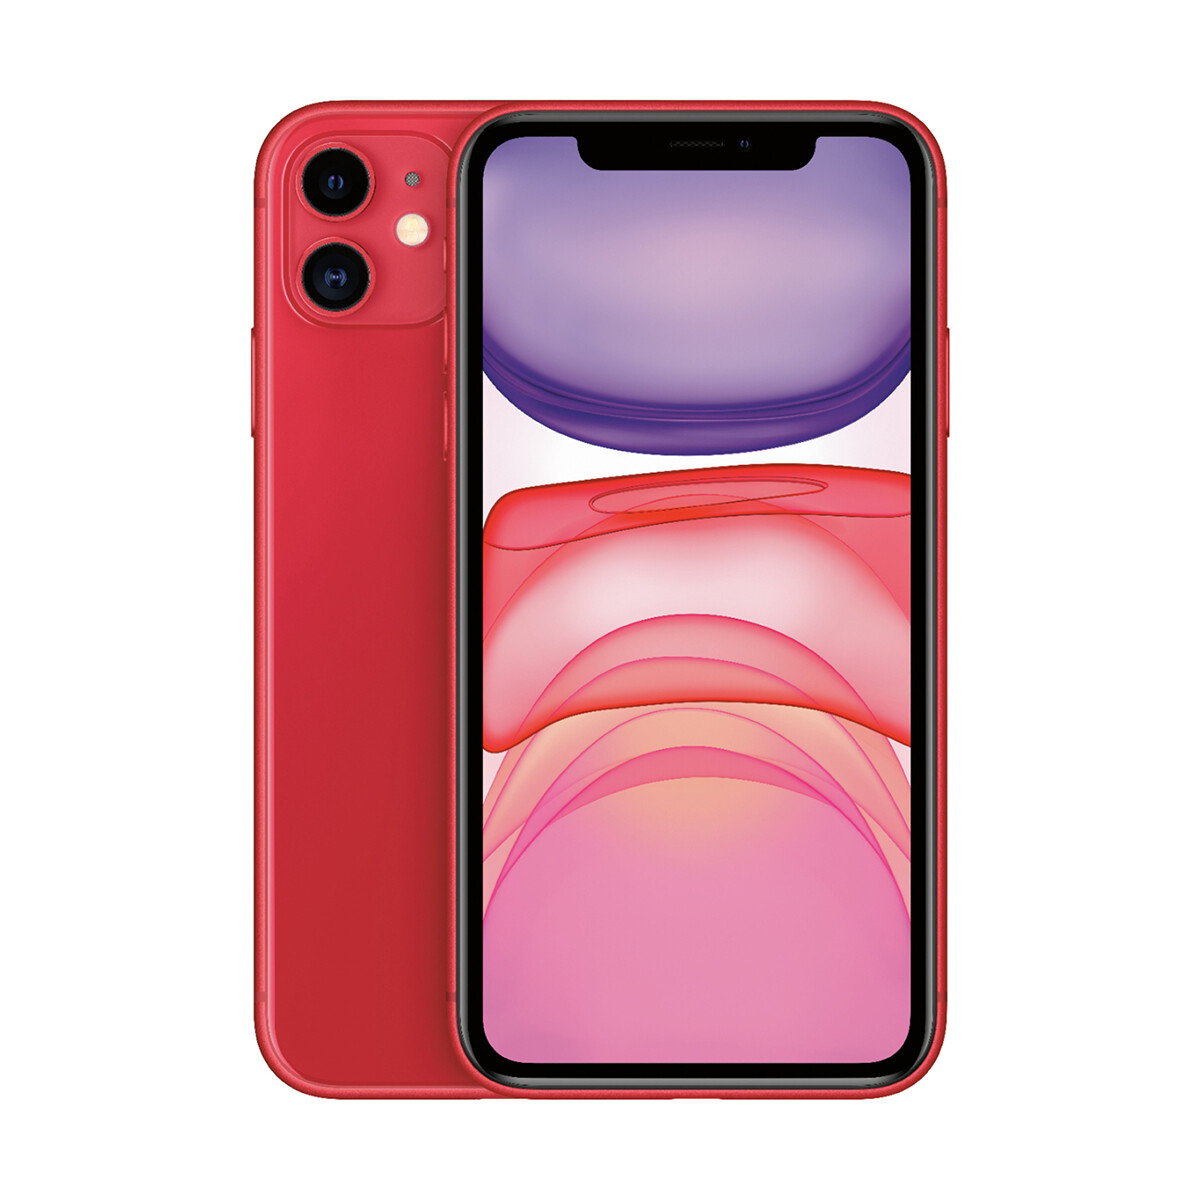 Iphone 11 128gb - Red 